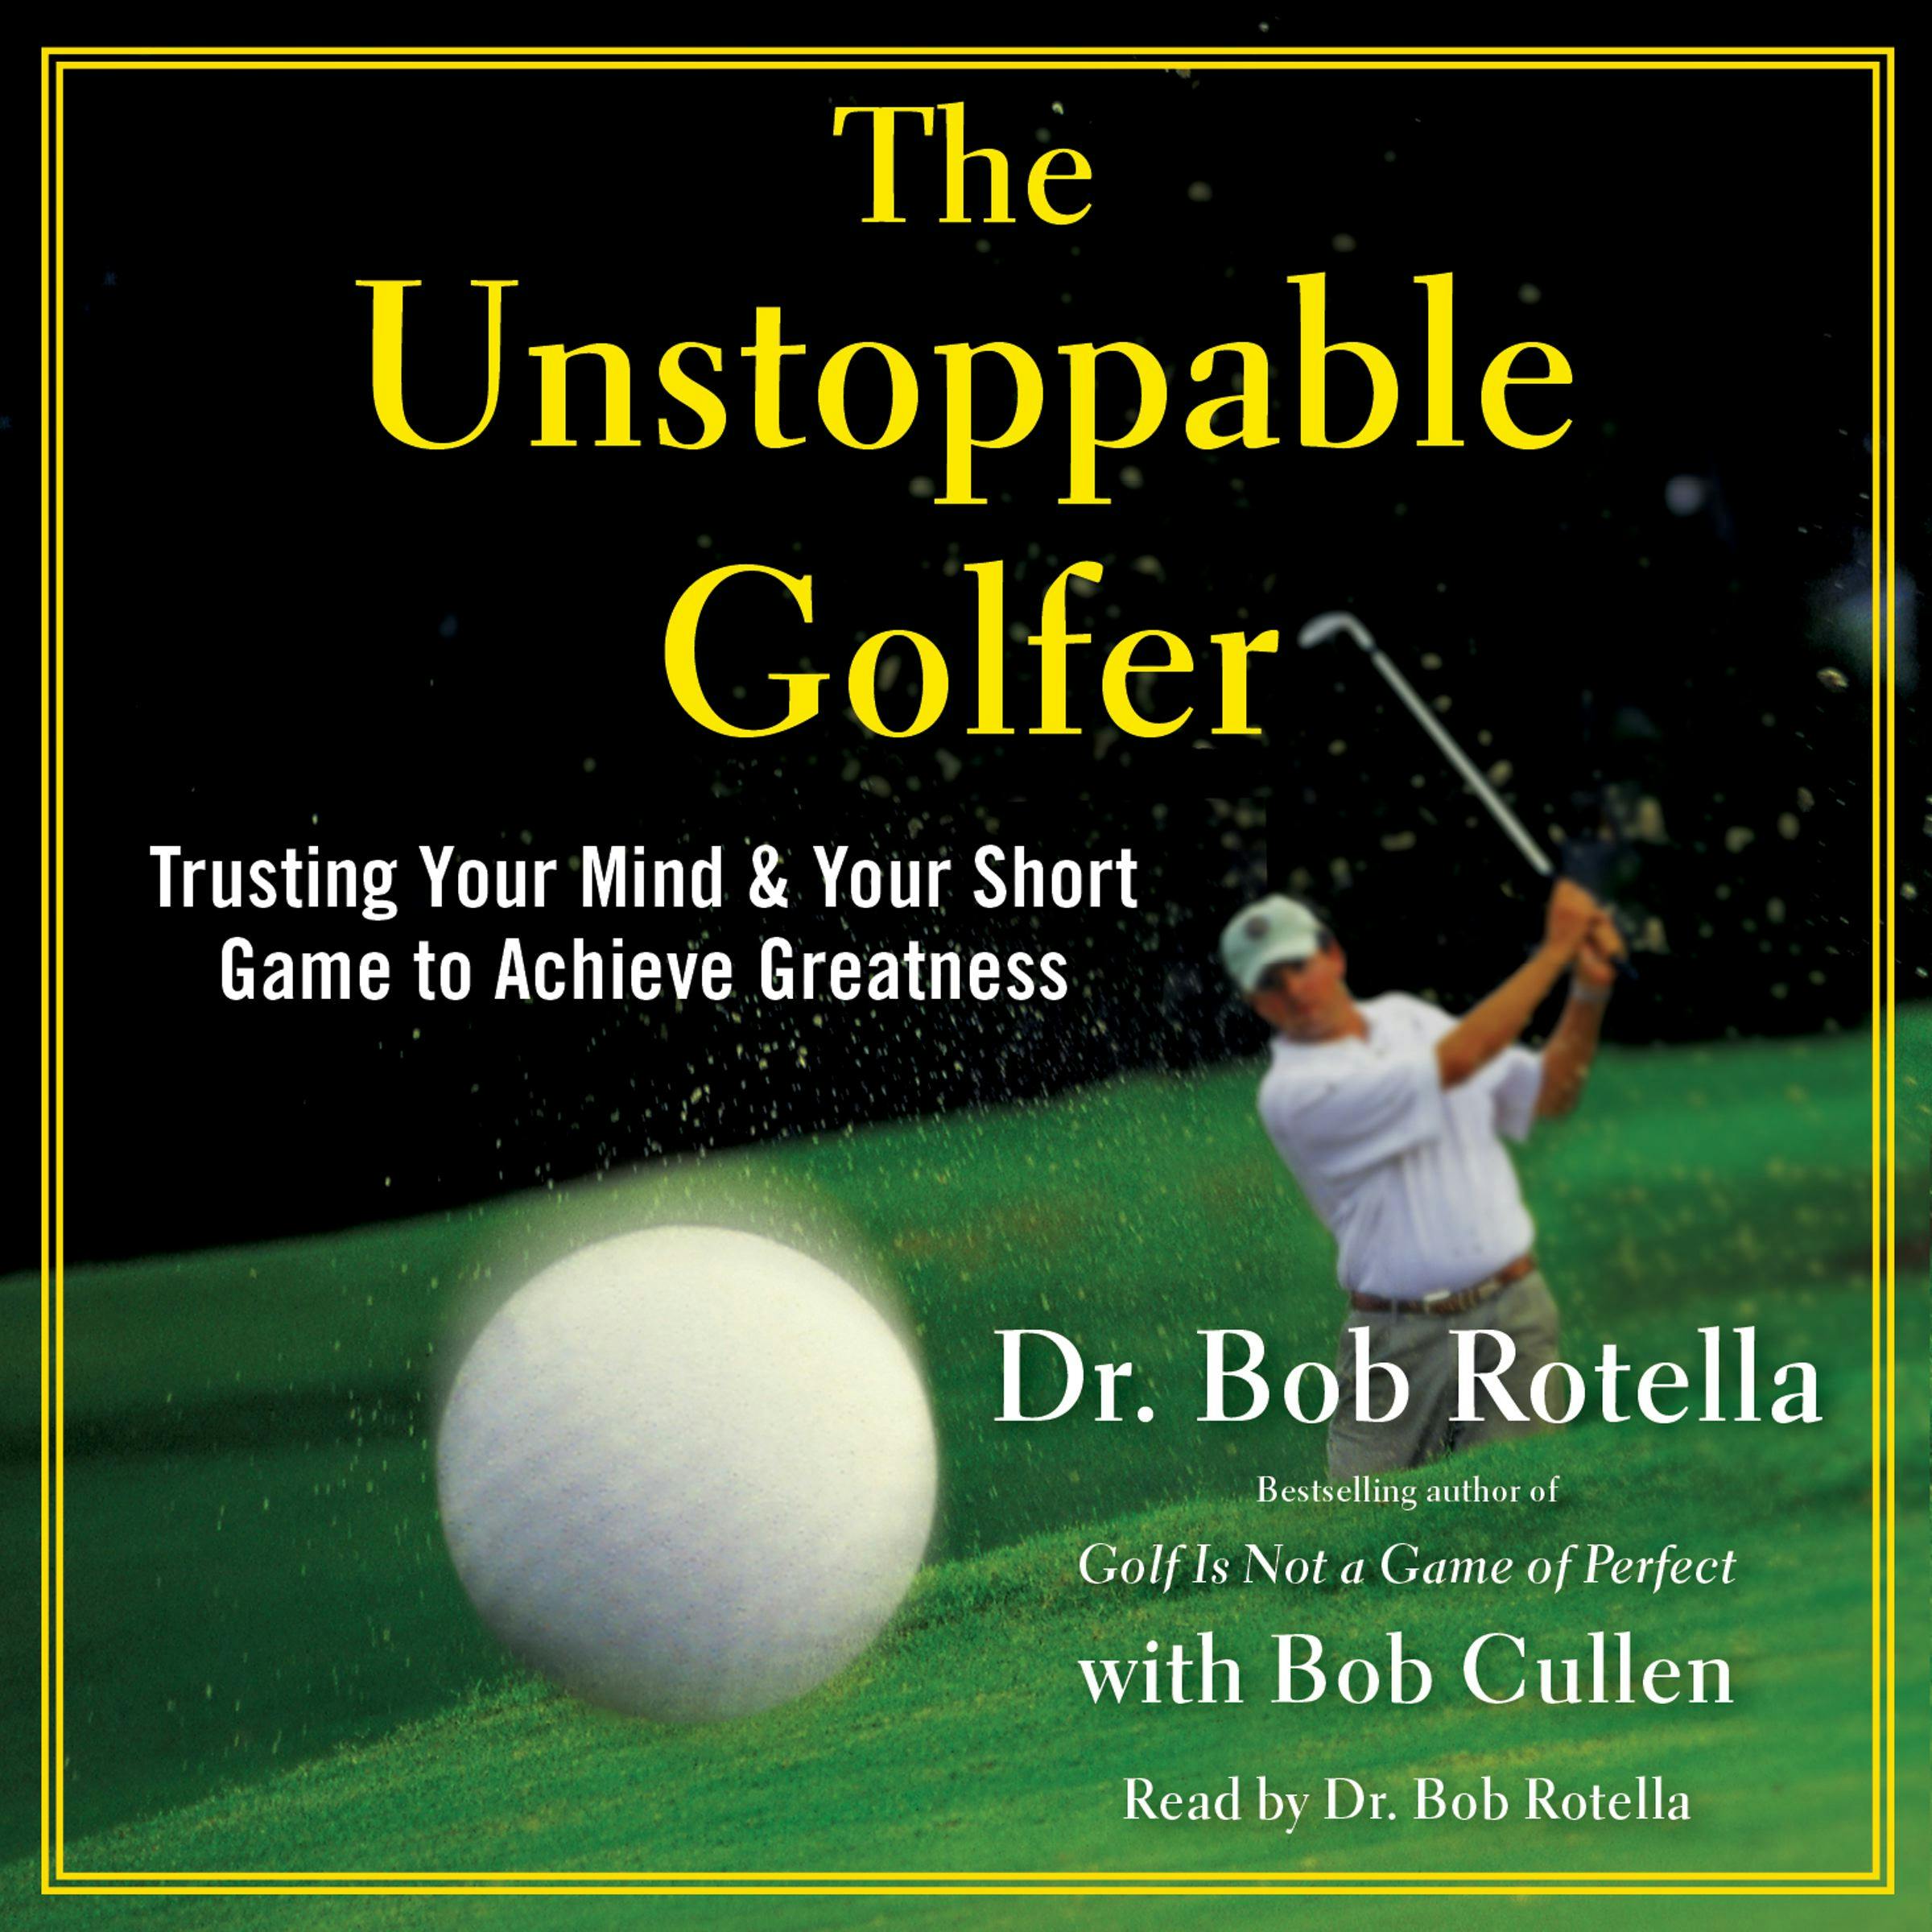 The Unstoppable Golfer: Trusting Your Mind & Your Short Game to Achieve Greatness - Bob Rotella